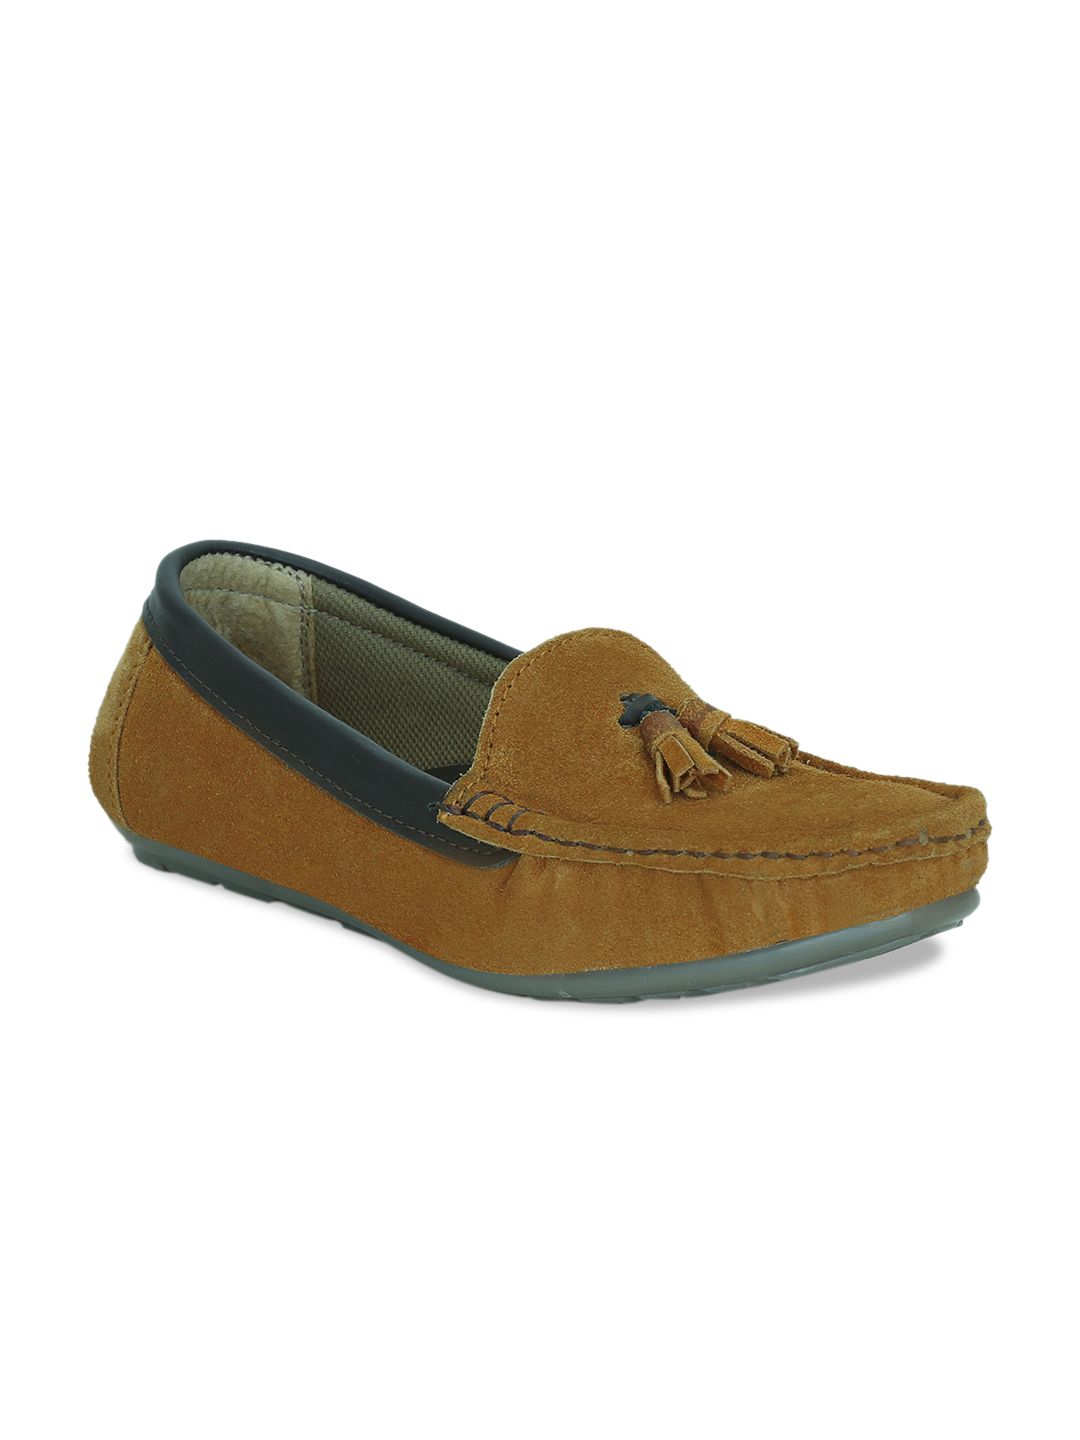 Get Glamr Women Tan Brown Suede Loafers Price in India